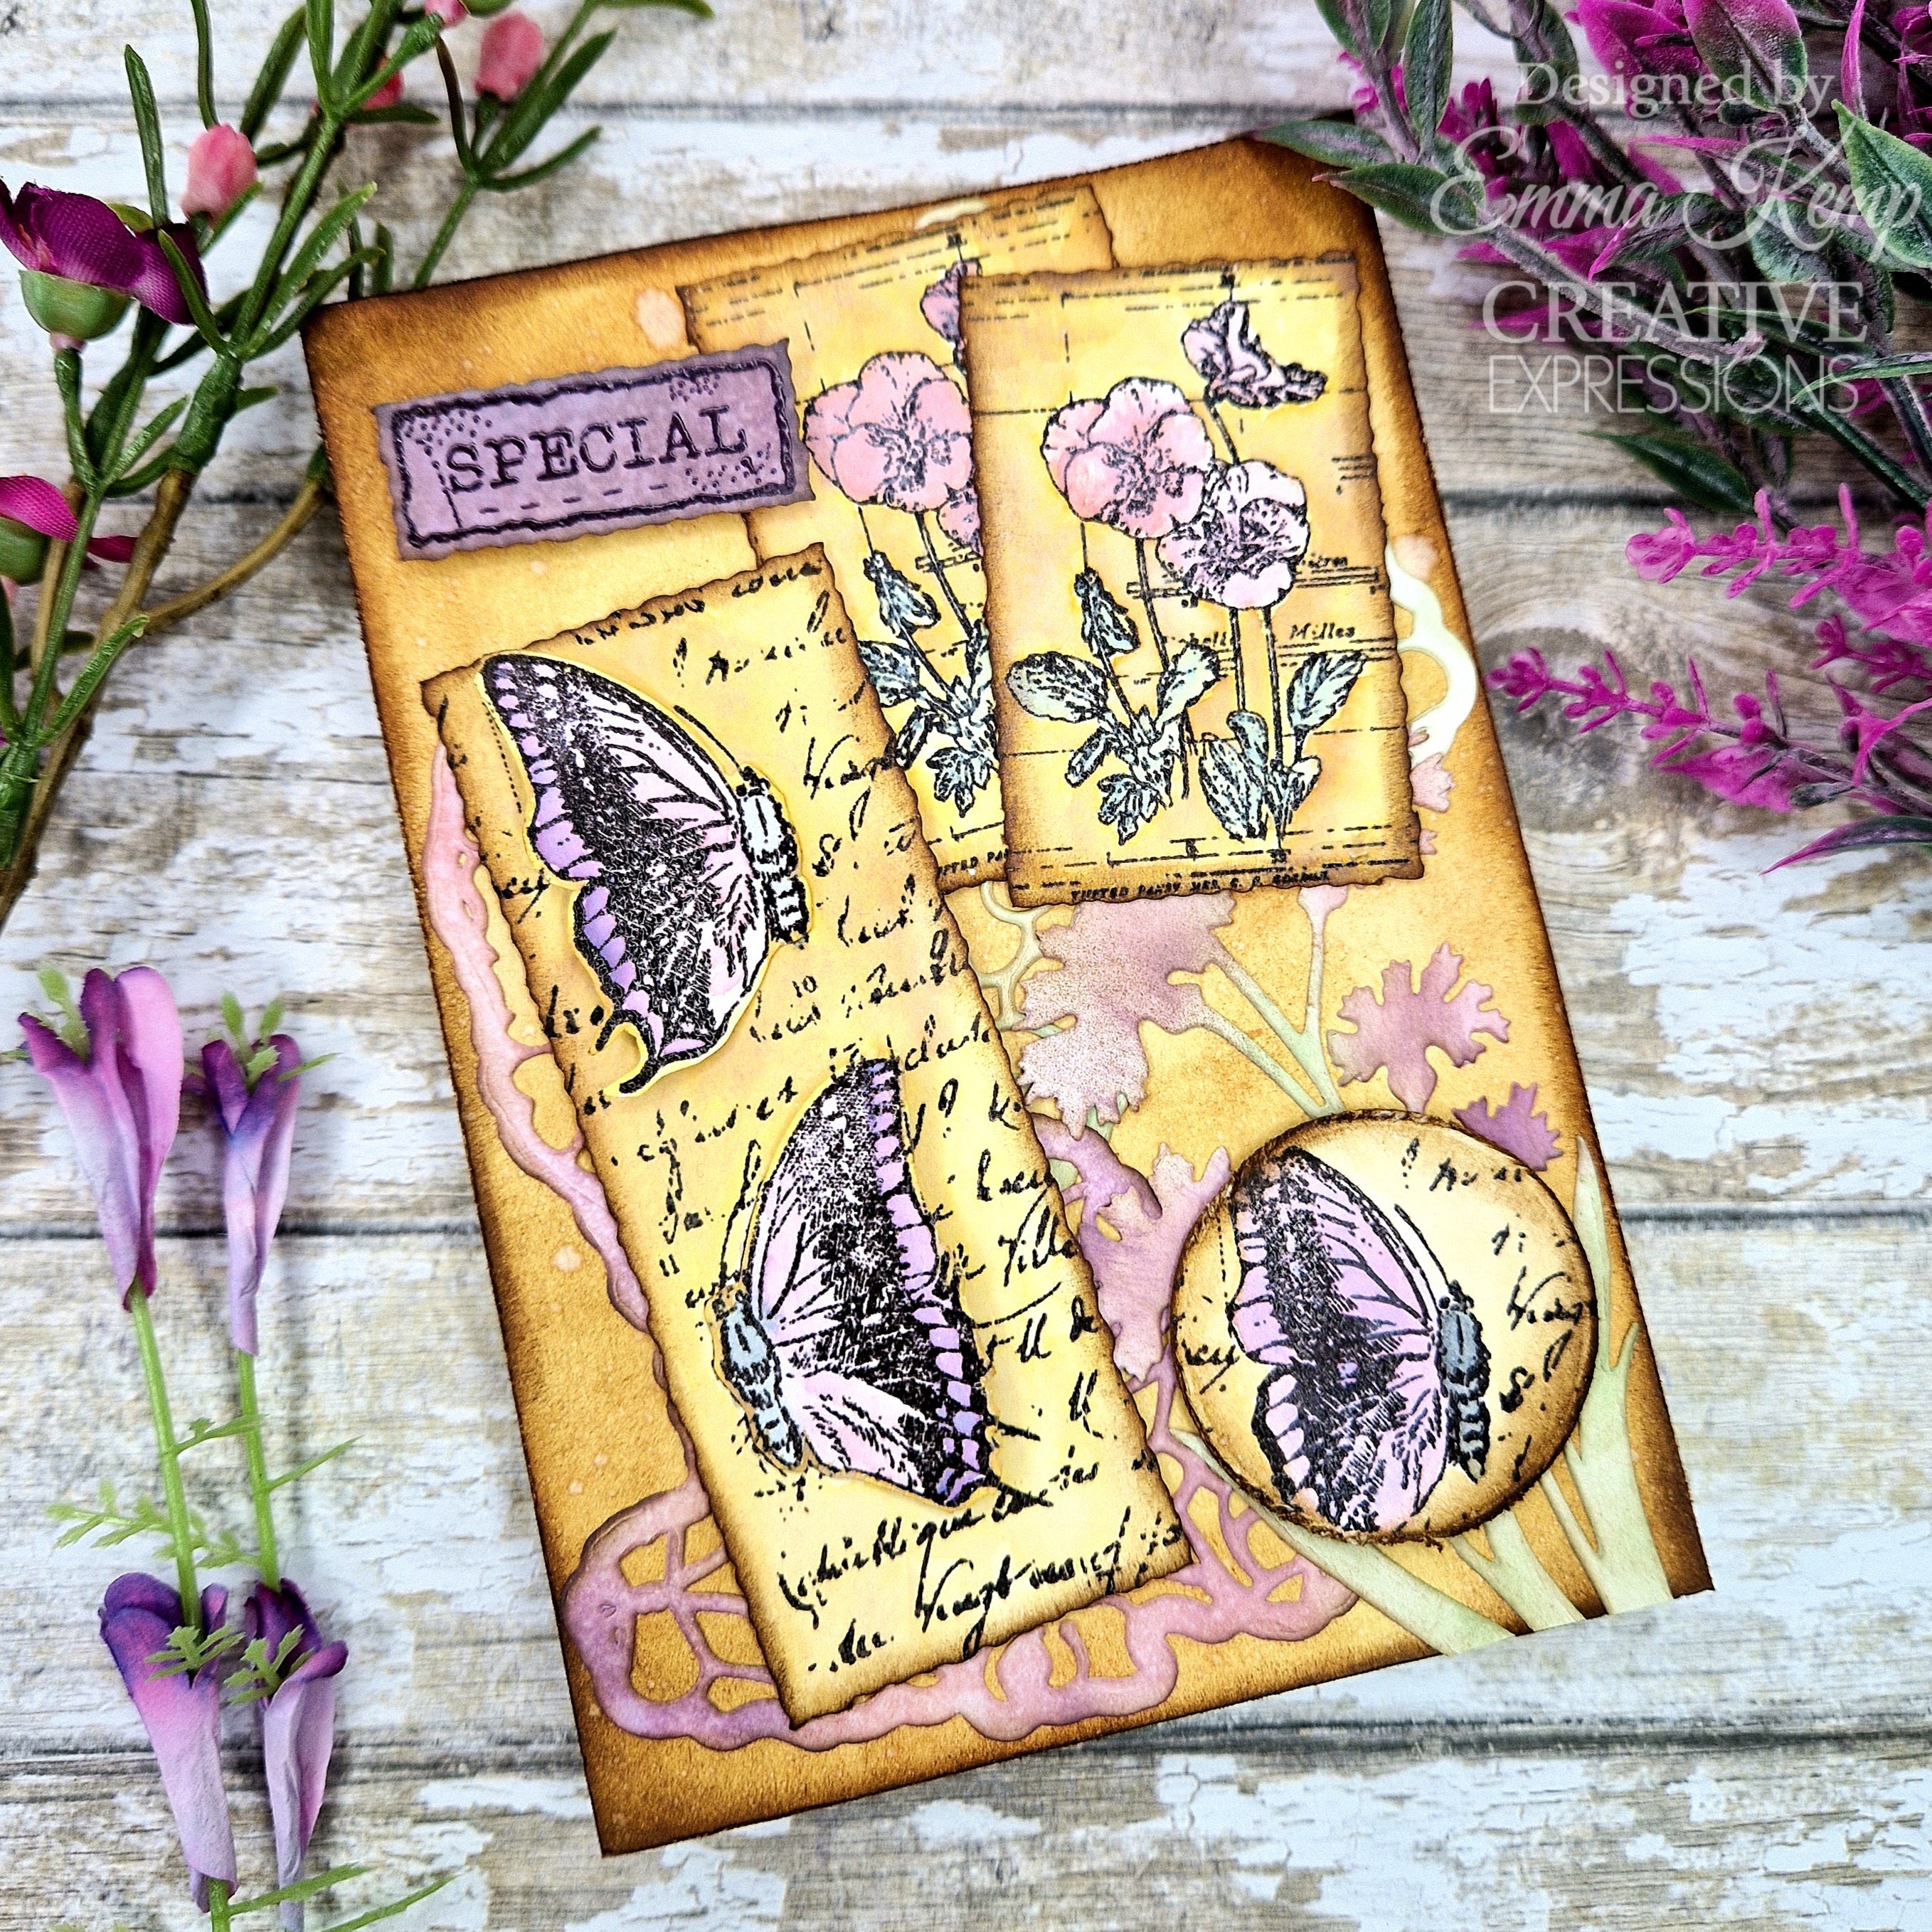 Creative Expressions Sam Poole Faded Flora 4 in x 6 in Clear Stamp Set